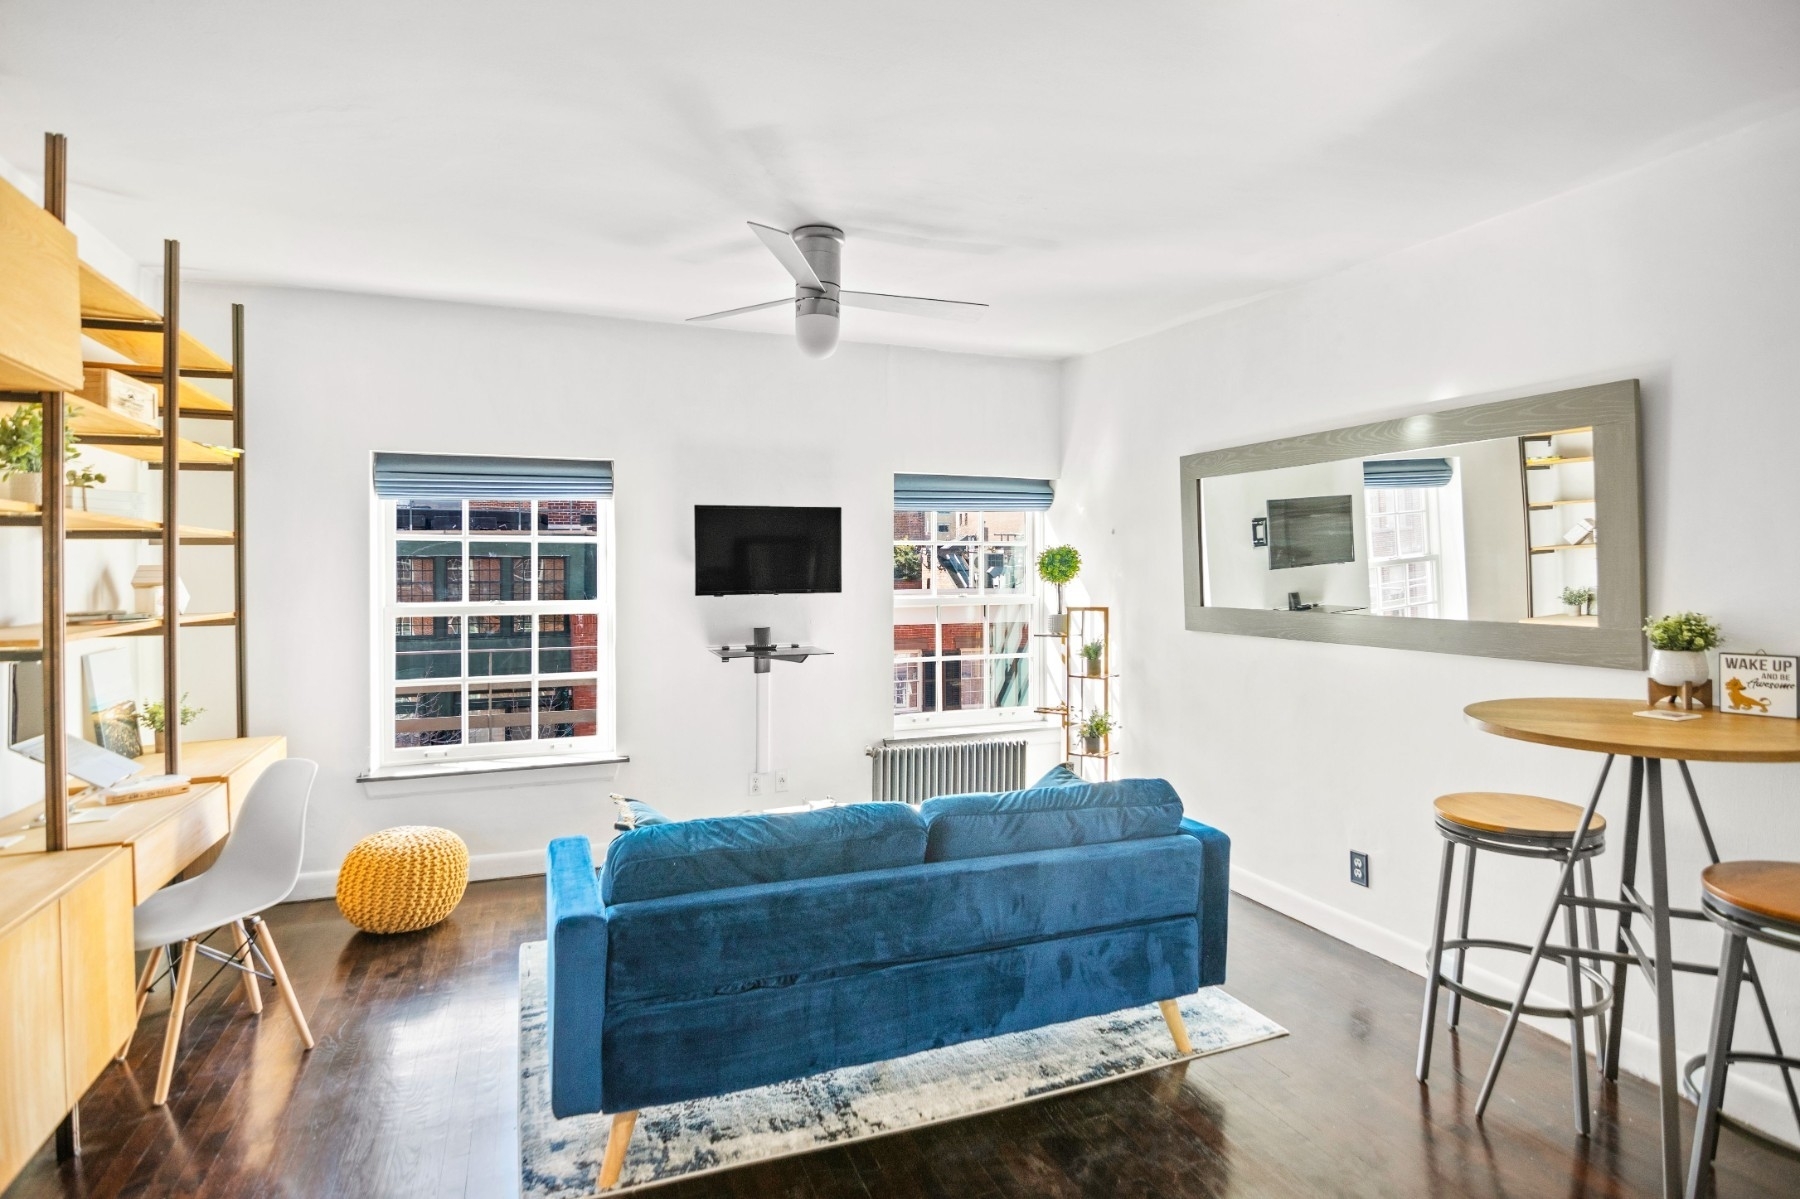 Property at 815 GREENWICH ST, PH5D West Village, New York, New York 10014